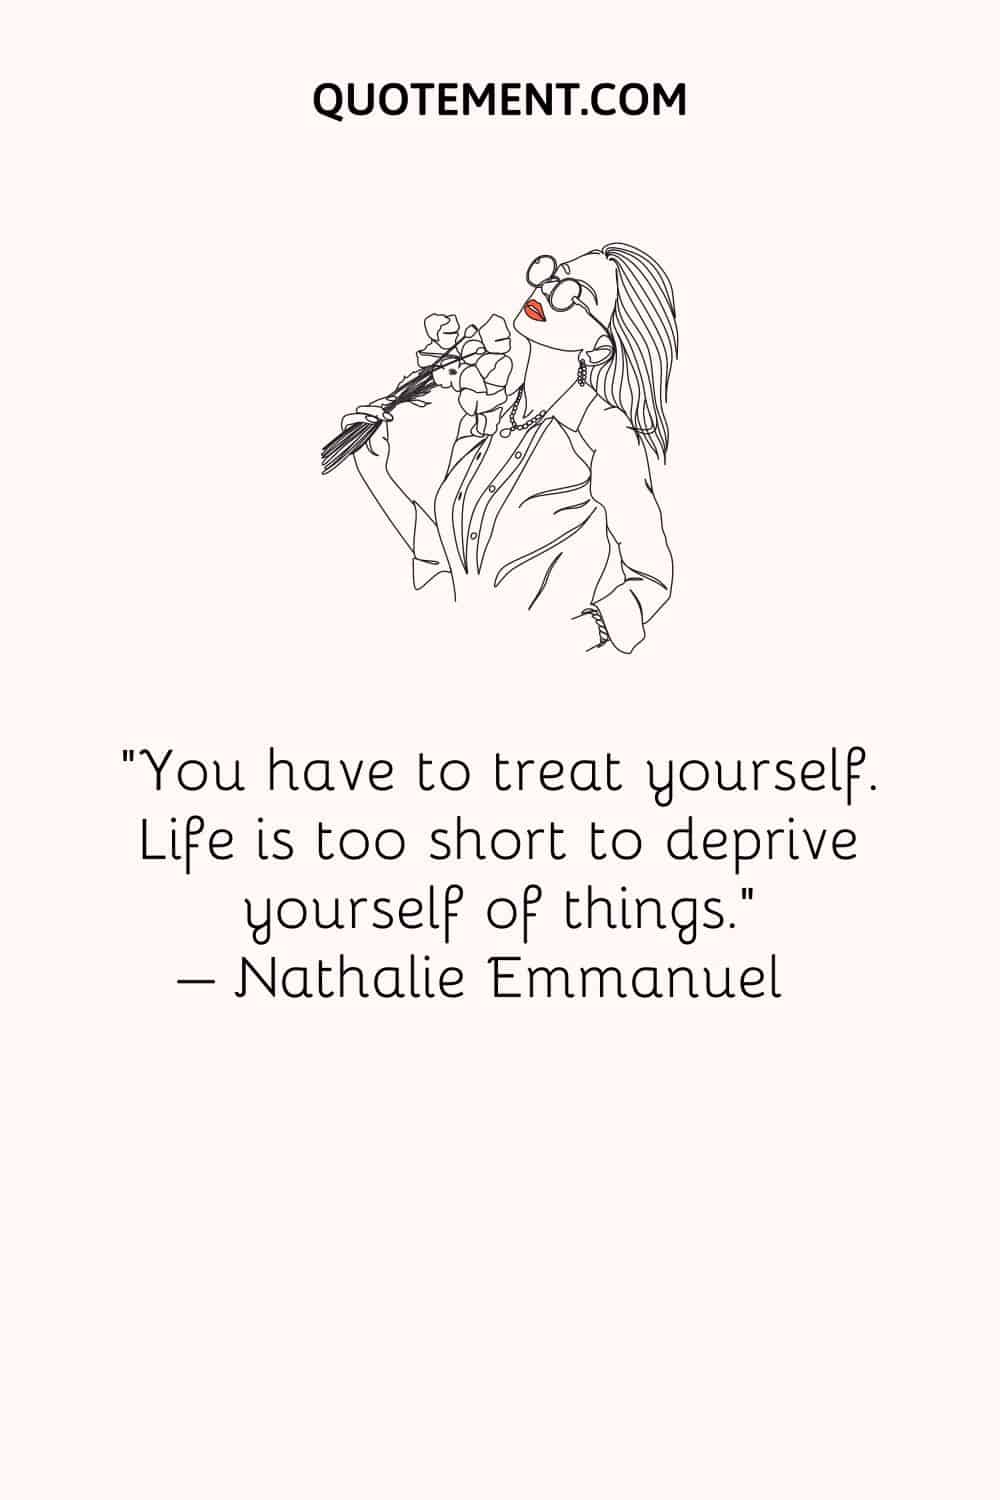 You have to treat yourself. Life is too short to deprive yourself of things